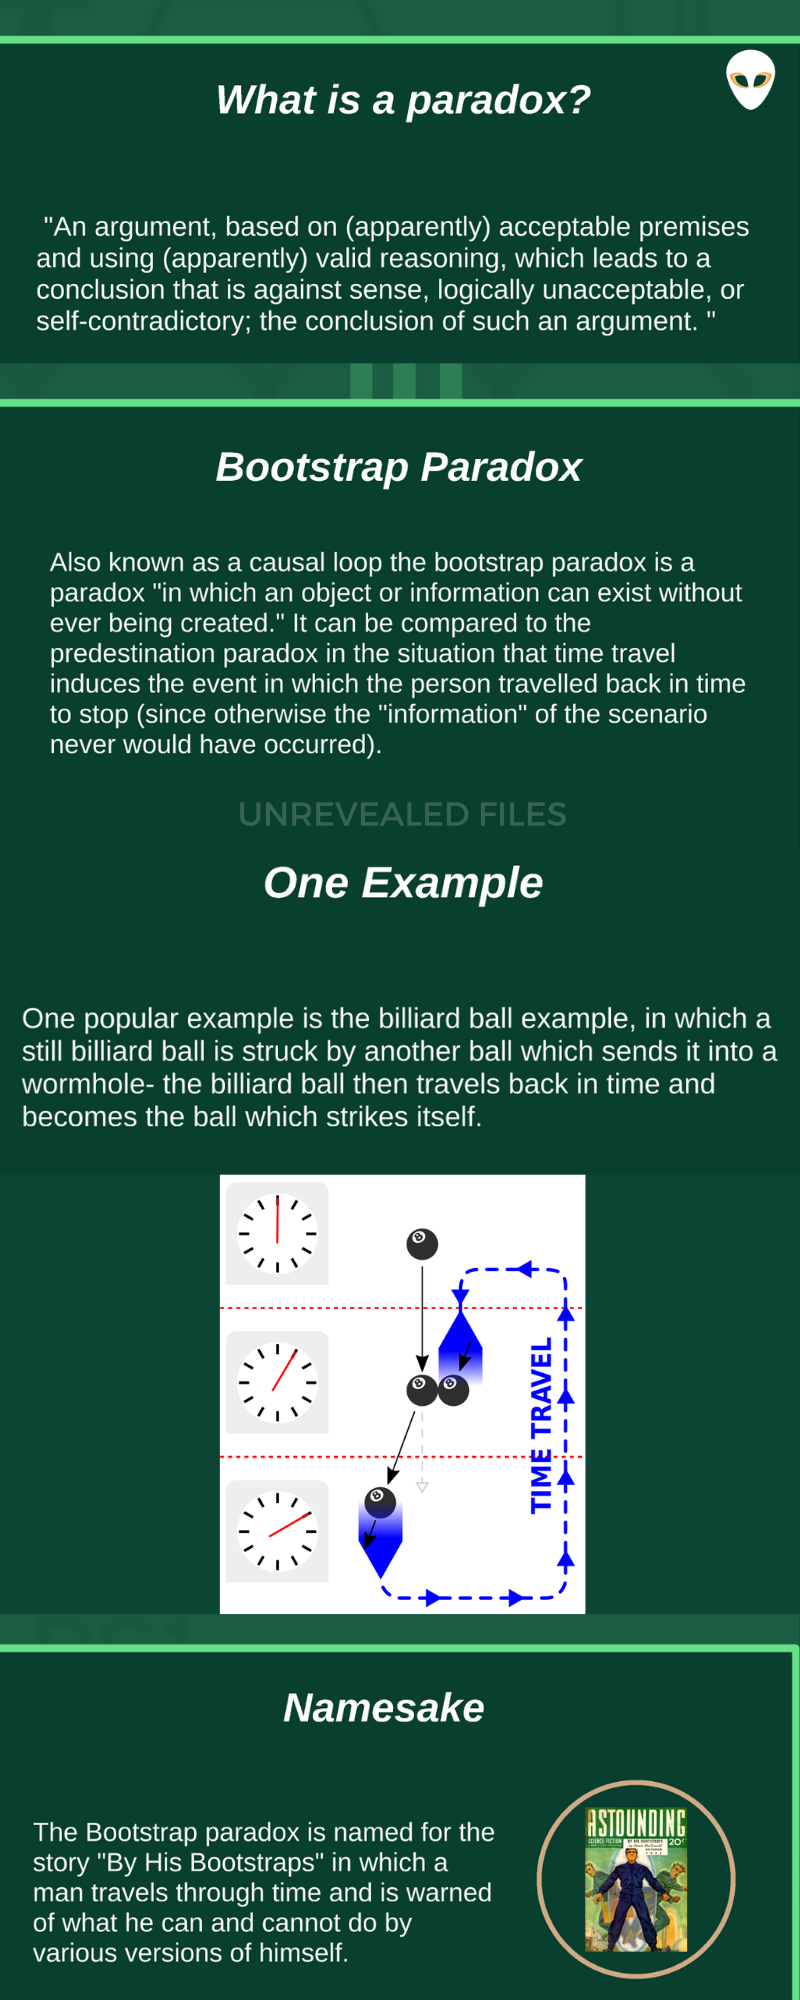 Visual Infographic Explanation of Bootstrap Paradox